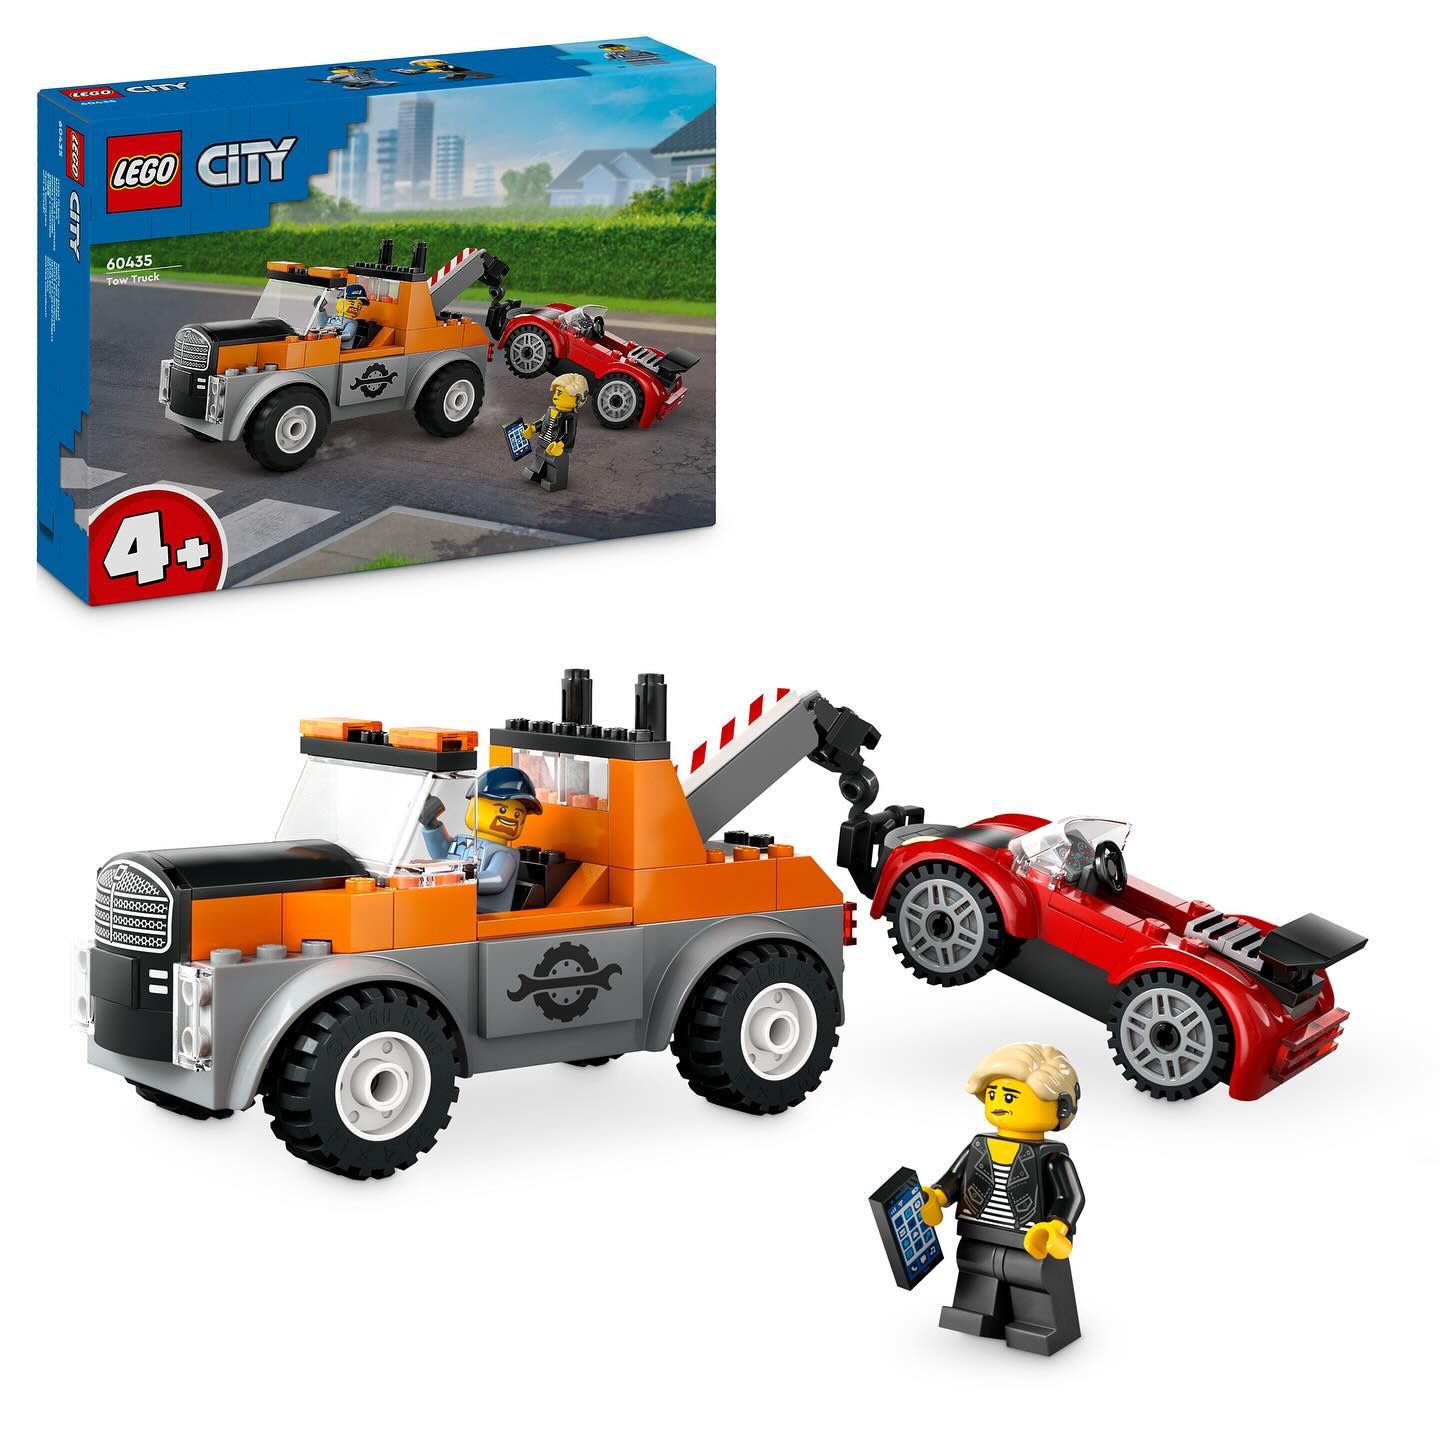 LEGO City Tow Truck 60435